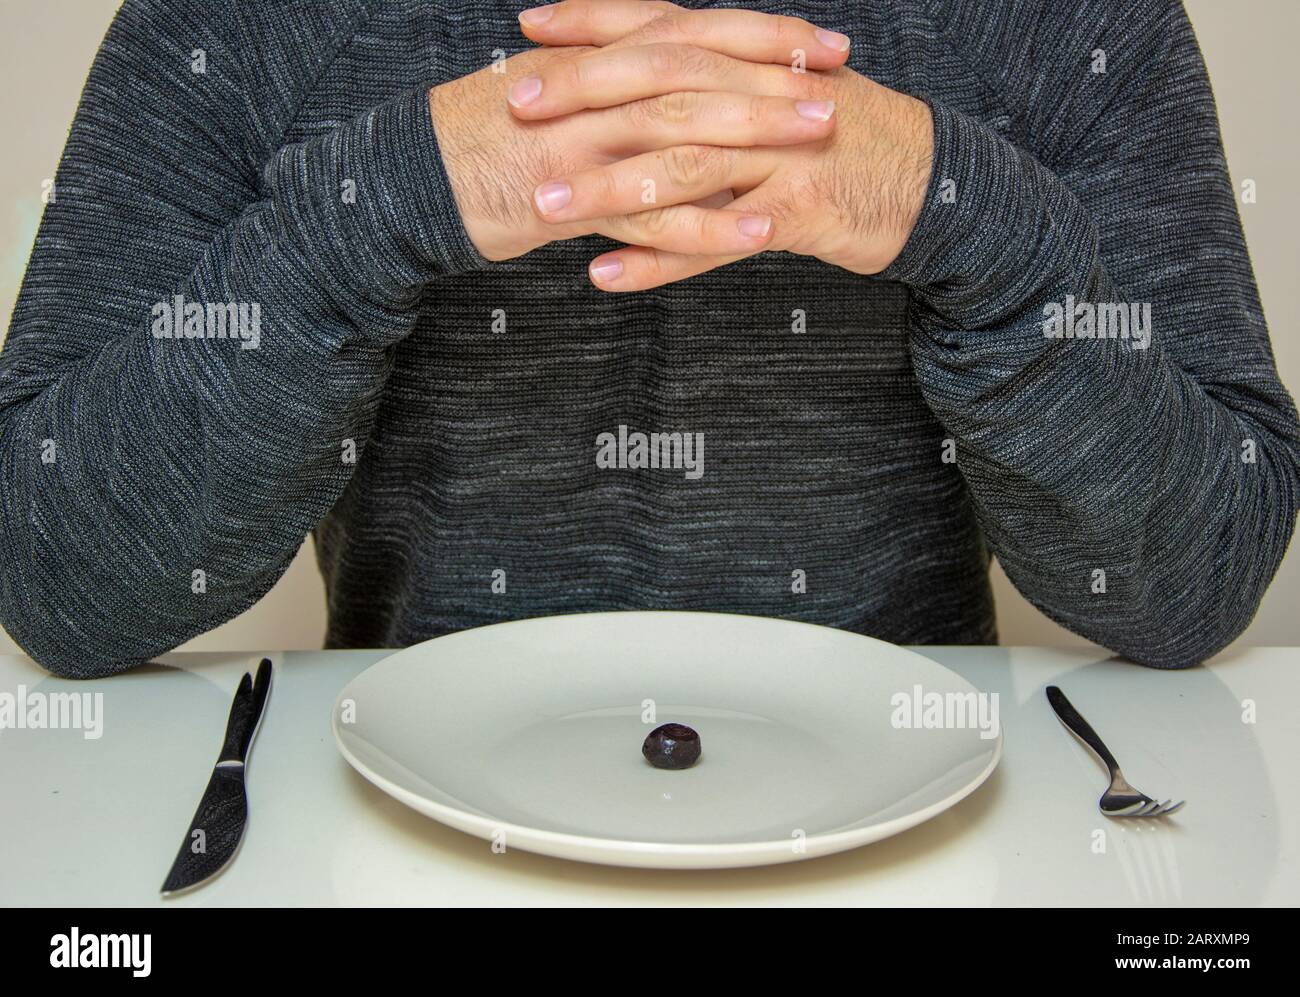 Man with hands tied looking at plate Stock Photo